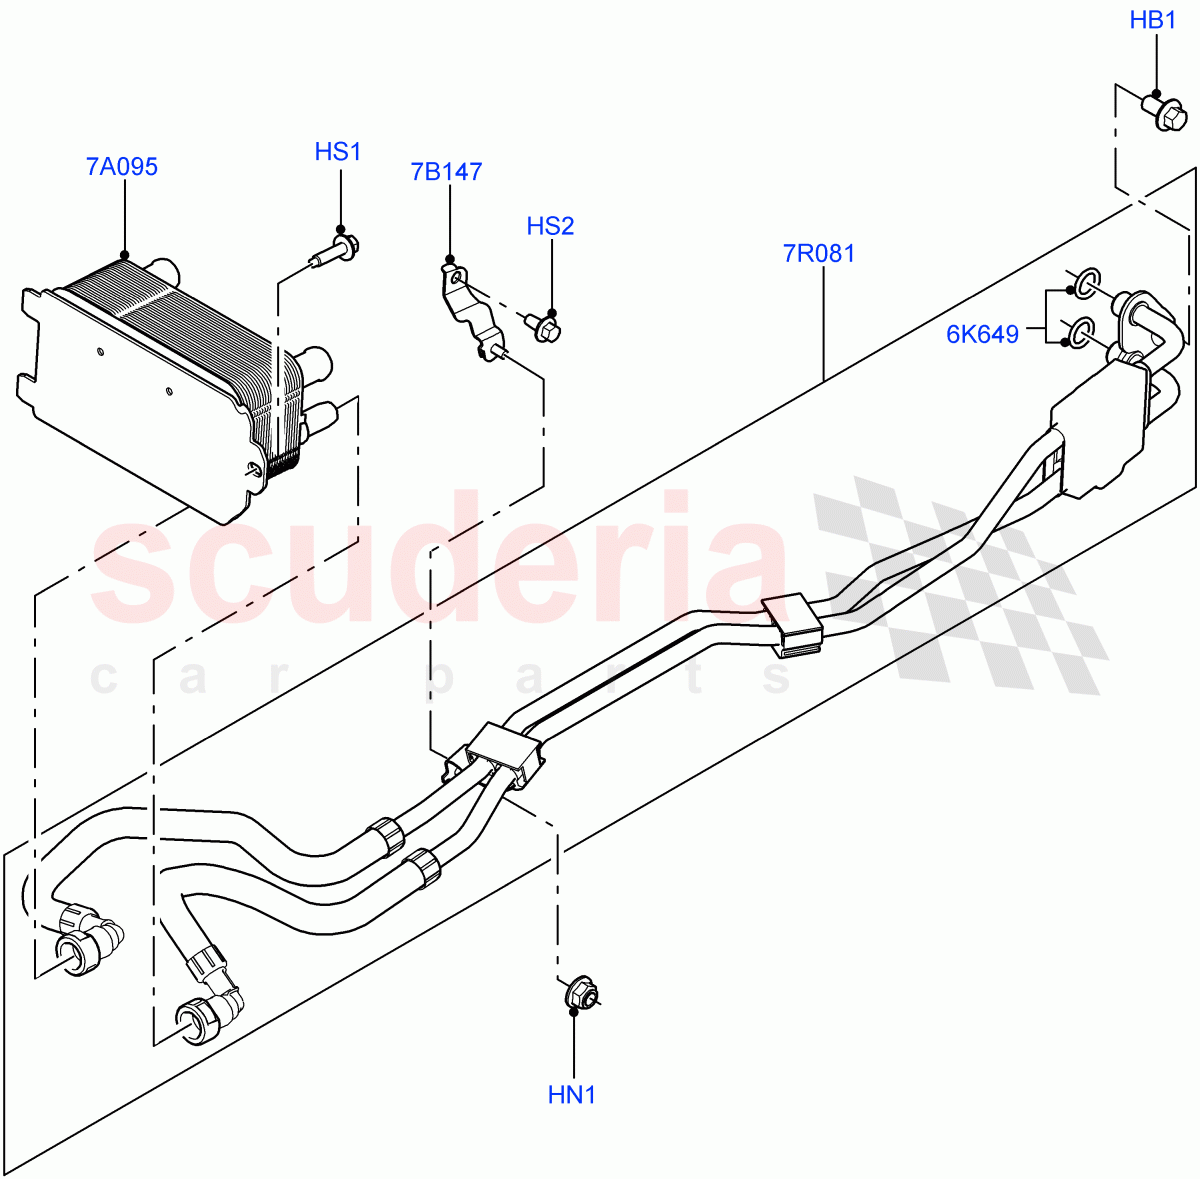 Transmission Cooling Systems(4.4L DOHC DITC V8 Diesel,8 Speed Auto Trans ZF 8HP76)((V)FROMKA000001) of Land Rover Land Rover Range Rover Sport (2014+) [2.0 Turbo Petrol AJ200P]